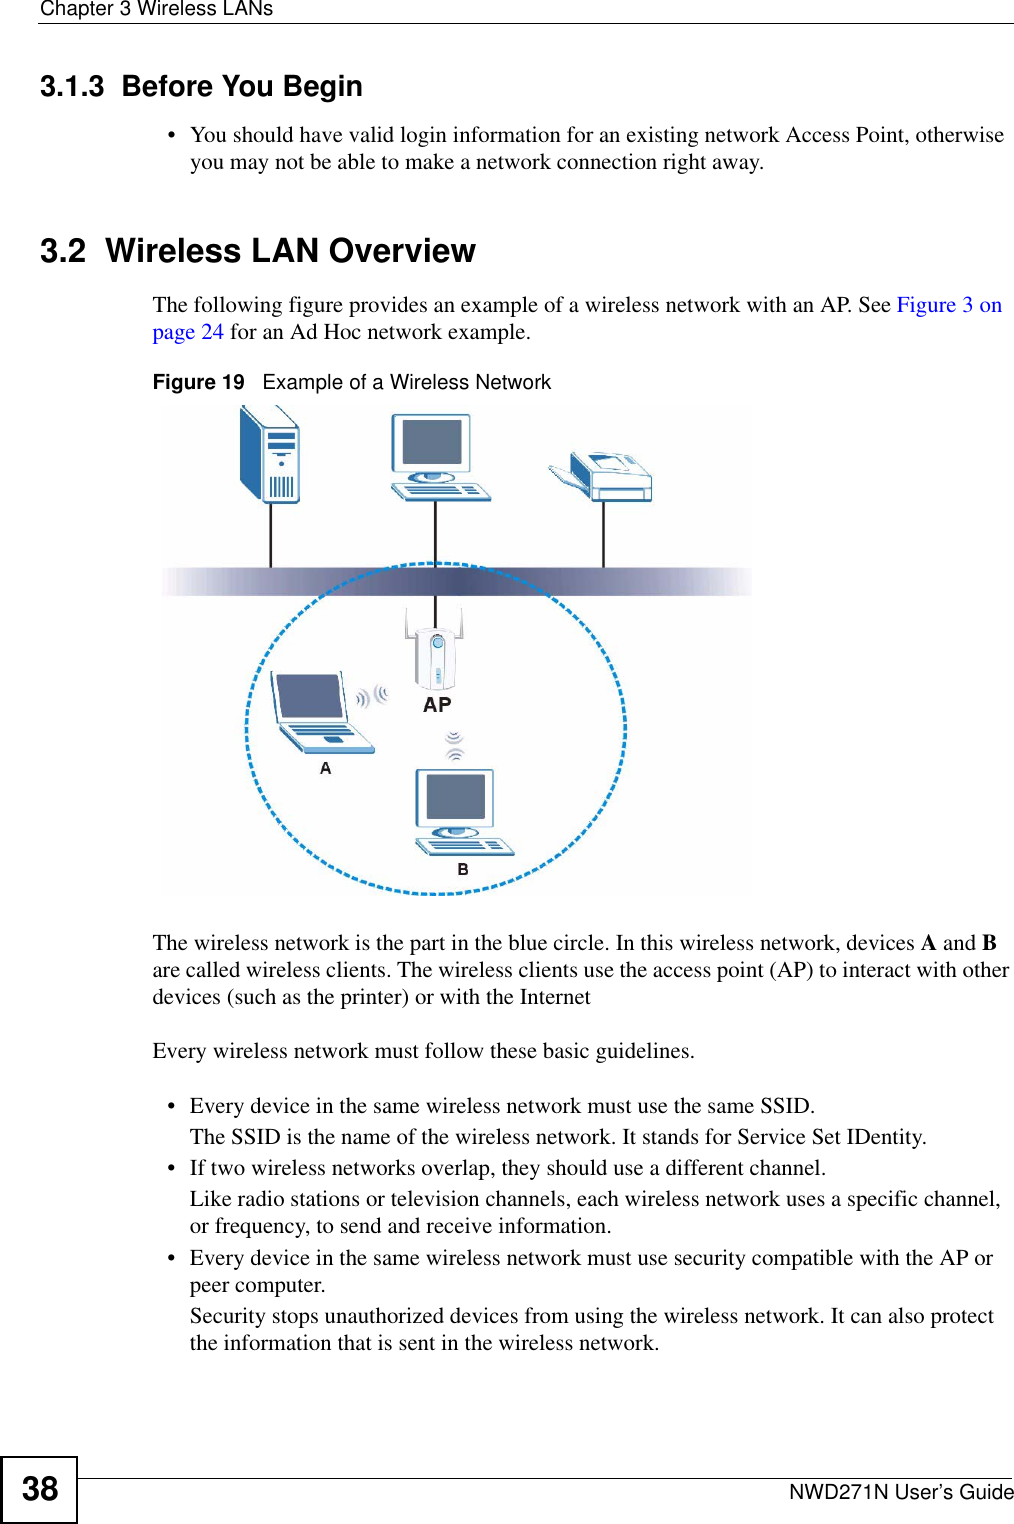 Chapter 3 Wireless LANsNWD271N User’s Guide383.1.3  Before You Begin• You should have valid login information for an existing network Access Point, otherwise you may not be able to make a network connection right away.3.2  Wireless LAN Overview The following figure provides an example of a wireless network with an AP. See Figure 3 on page 24 for an Ad Hoc network example.Figure 19   Example of a Wireless NetworkThe wireless network is the part in the blue circle. In this wireless network, devices A and B are called wireless clients. The wireless clients use the access point (AP) to interact with other devices (such as the printer) or with the InternetEvery wireless network must follow these basic guidelines.• Every device in the same wireless network must use the same SSID.The SSID is the name of the wireless network. It stands for Service Set IDentity.• If two wireless networks overlap, they should use a different channel.Like radio stations or television channels, each wireless network uses a specific channel, or frequency, to send and receive information.• Every device in the same wireless network must use security compatible with the AP or peer computer.Security stops unauthorized devices from using the wireless network. It can also protect the information that is sent in the wireless network.